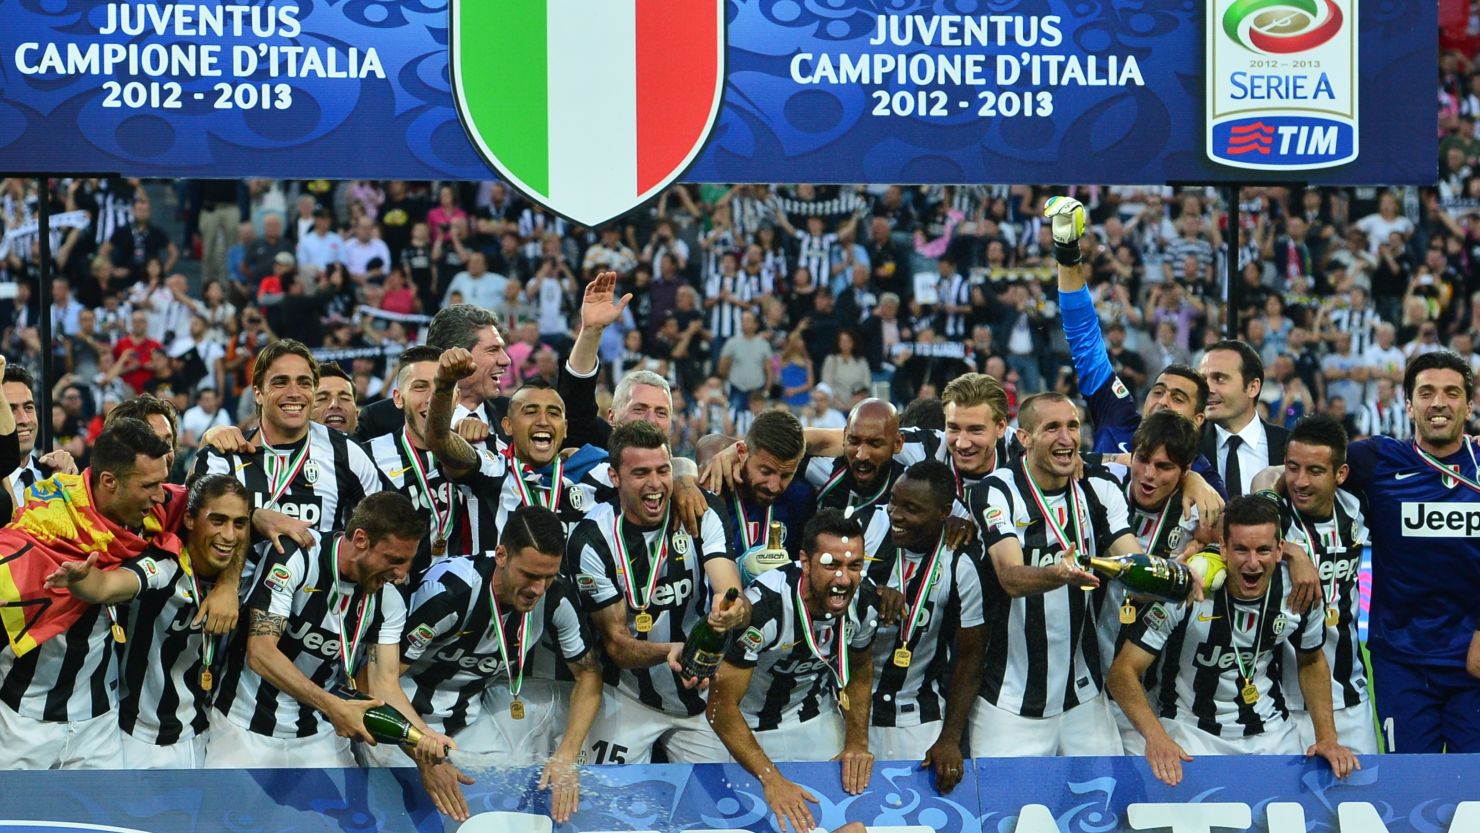 Champions Juventus were one of the high-profile clubs raided by Italian prosecutors.